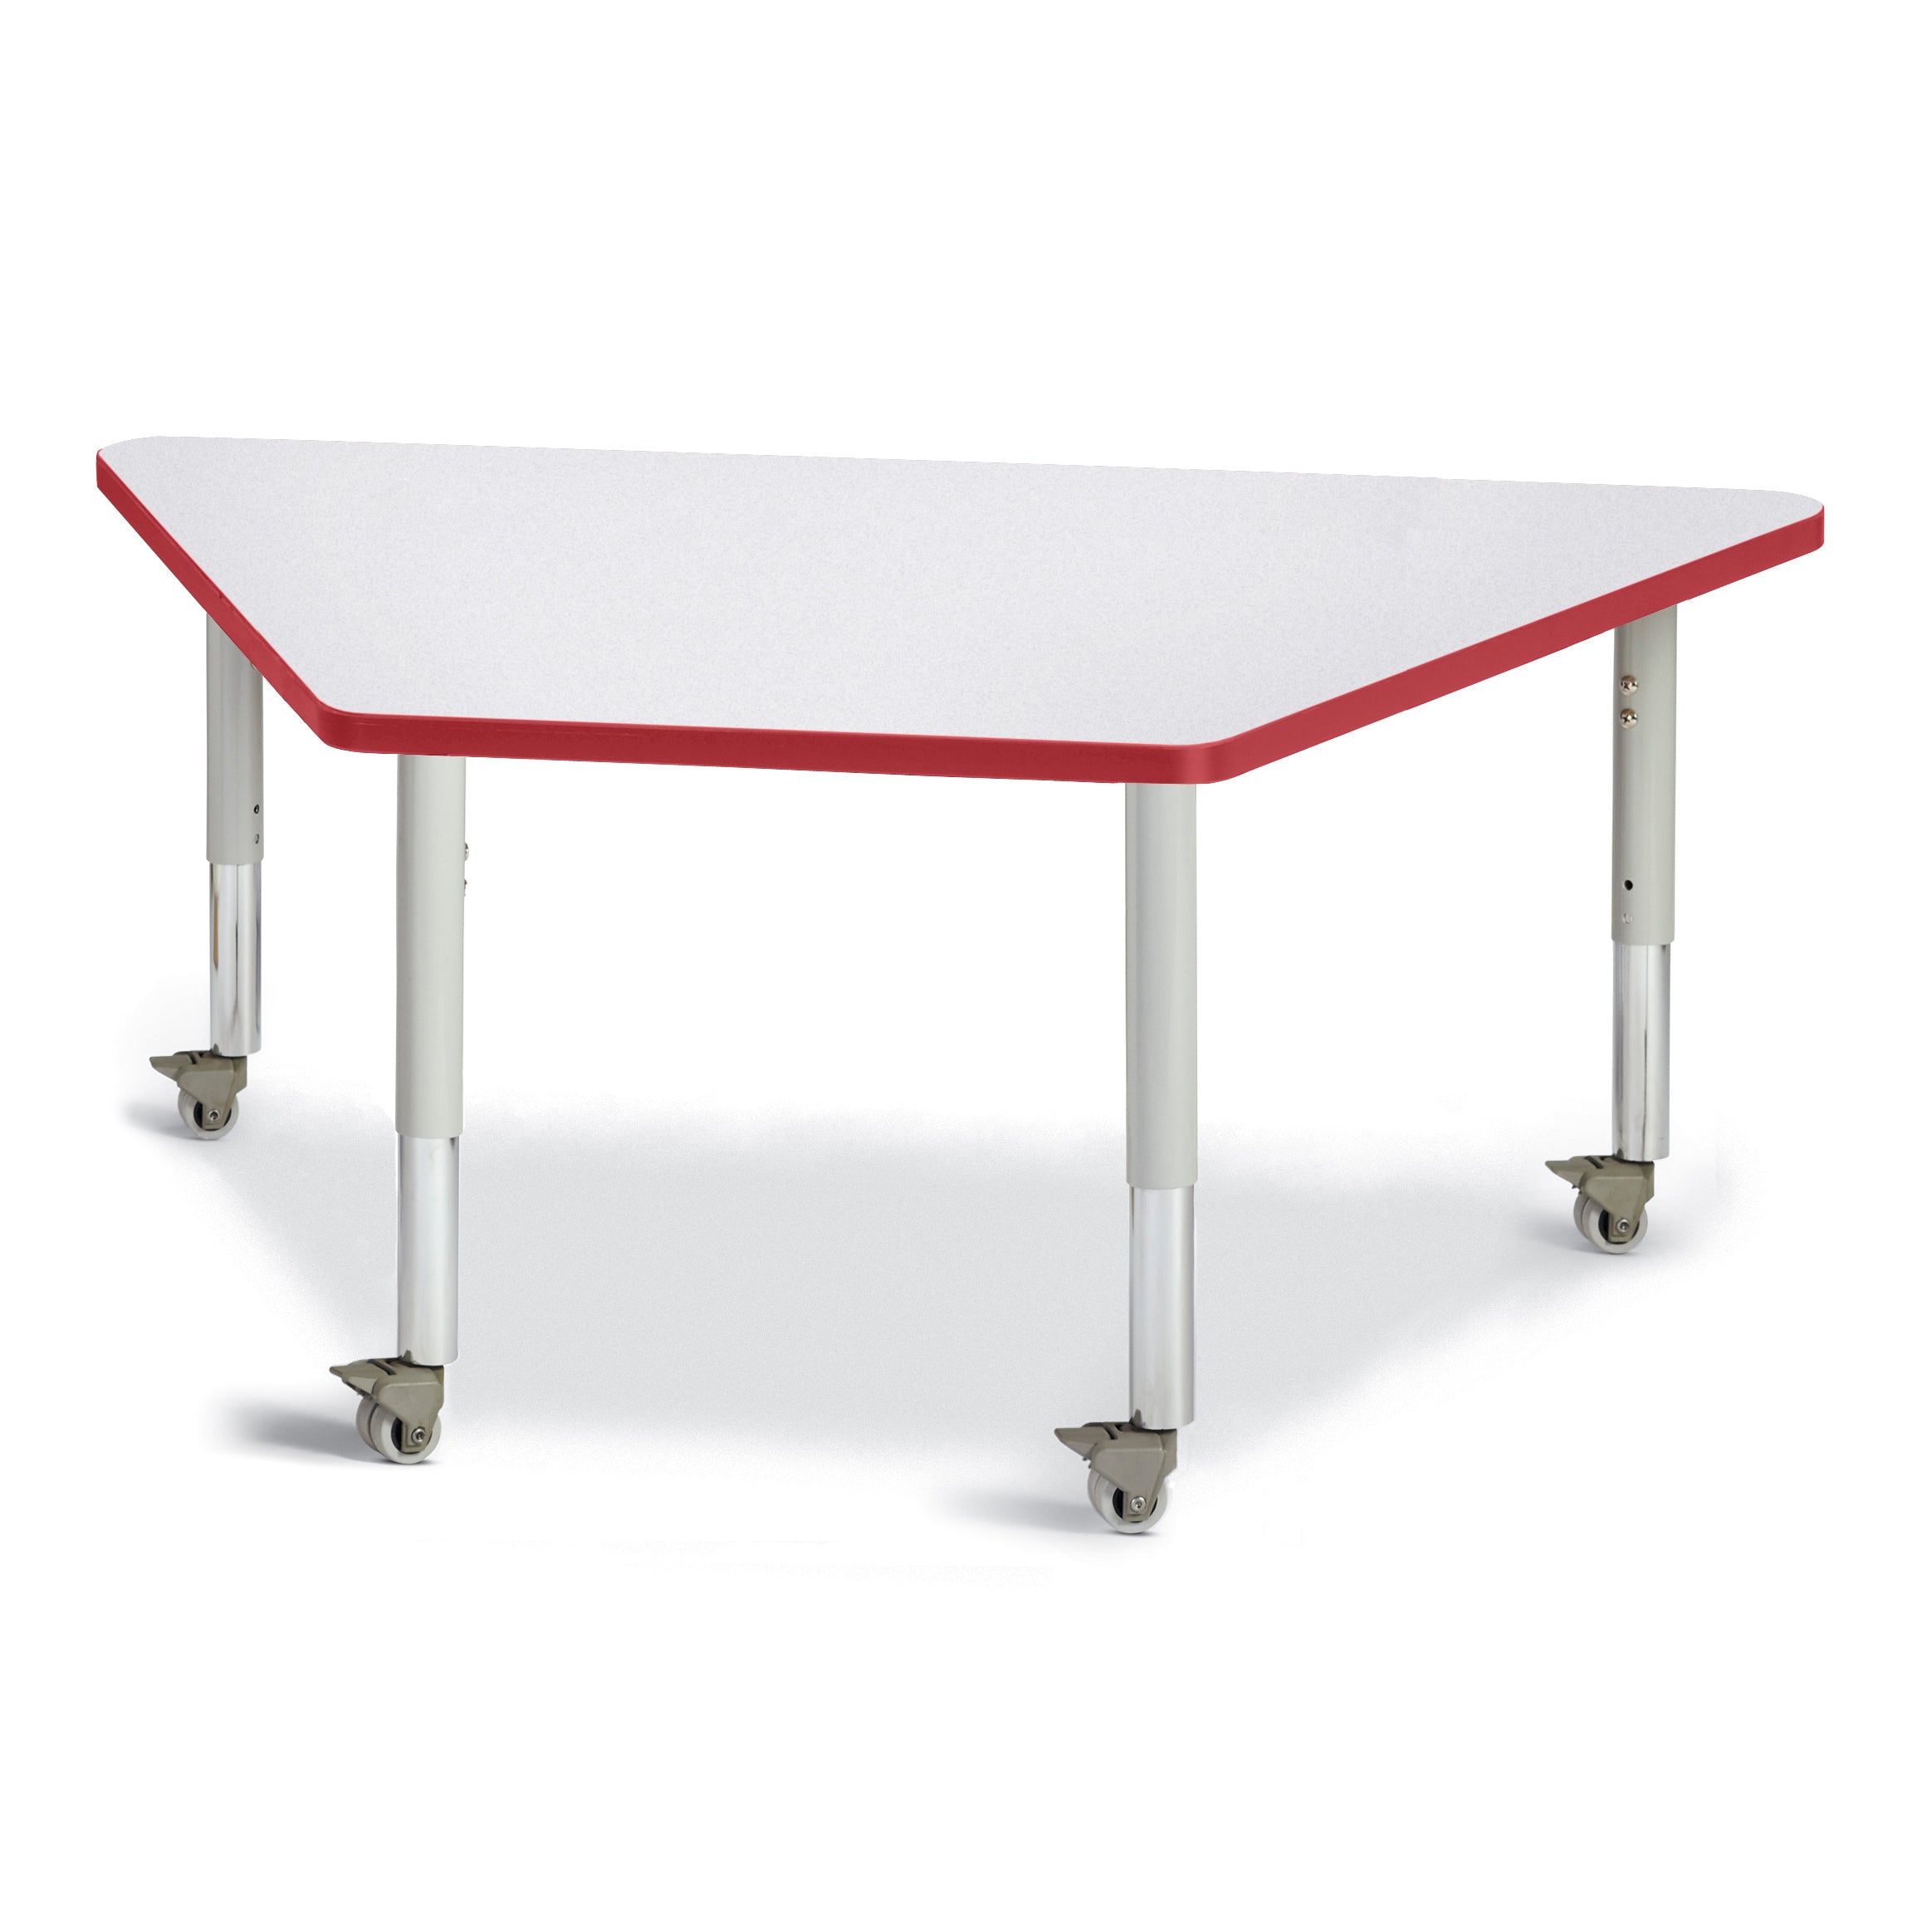 6443JCM008, Berries Trapezoid Activity Tables - 30" X 60", Mobile - Freckled Gray/Red/Gray